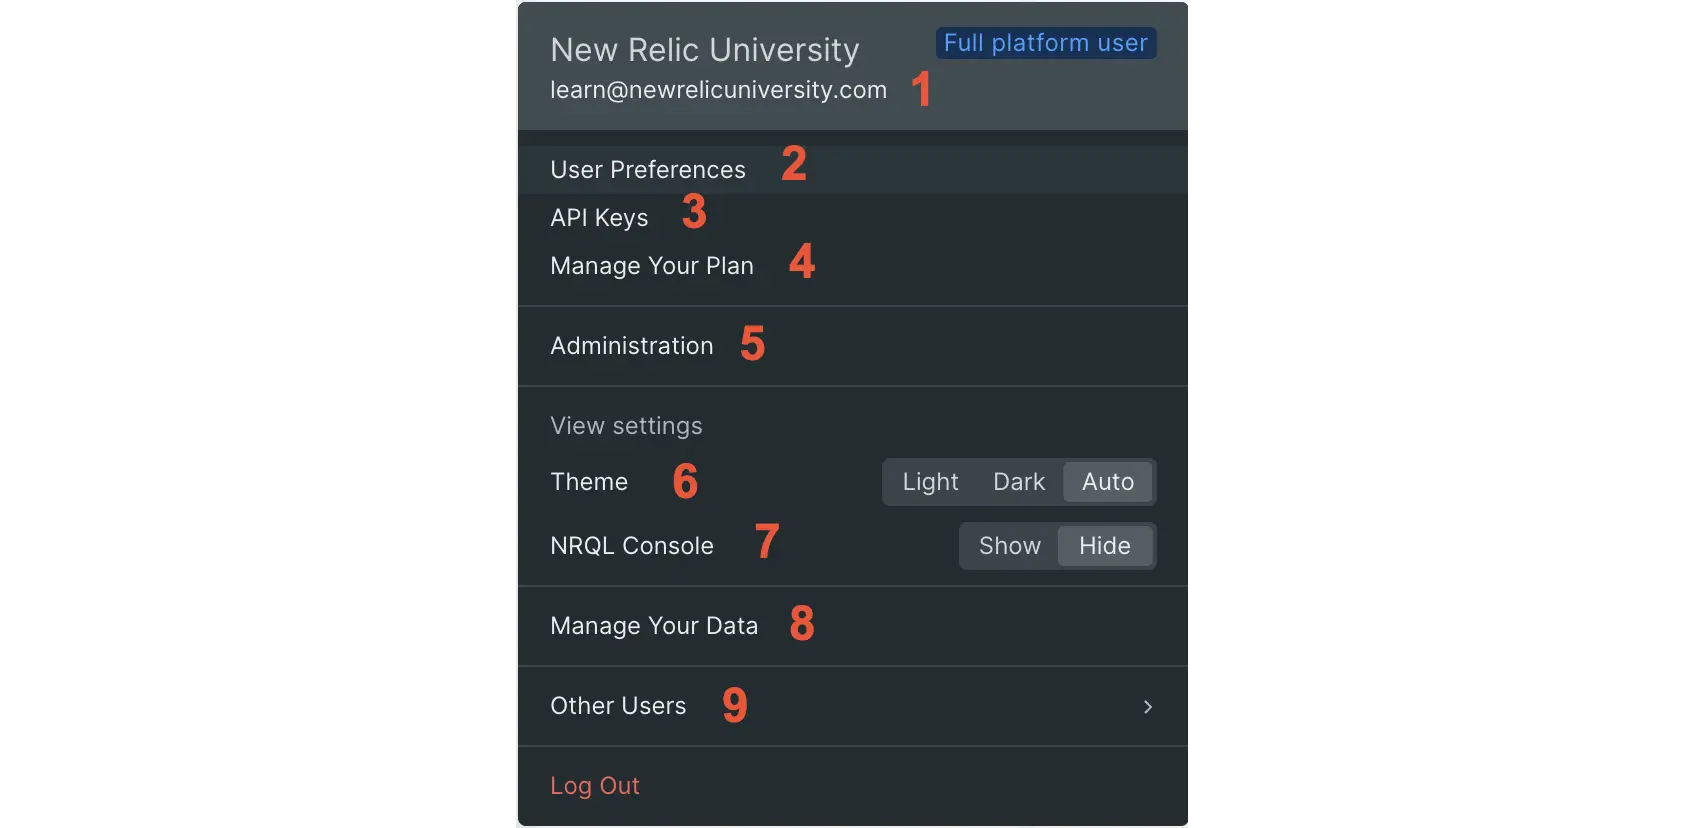 image of the New Relic user menu